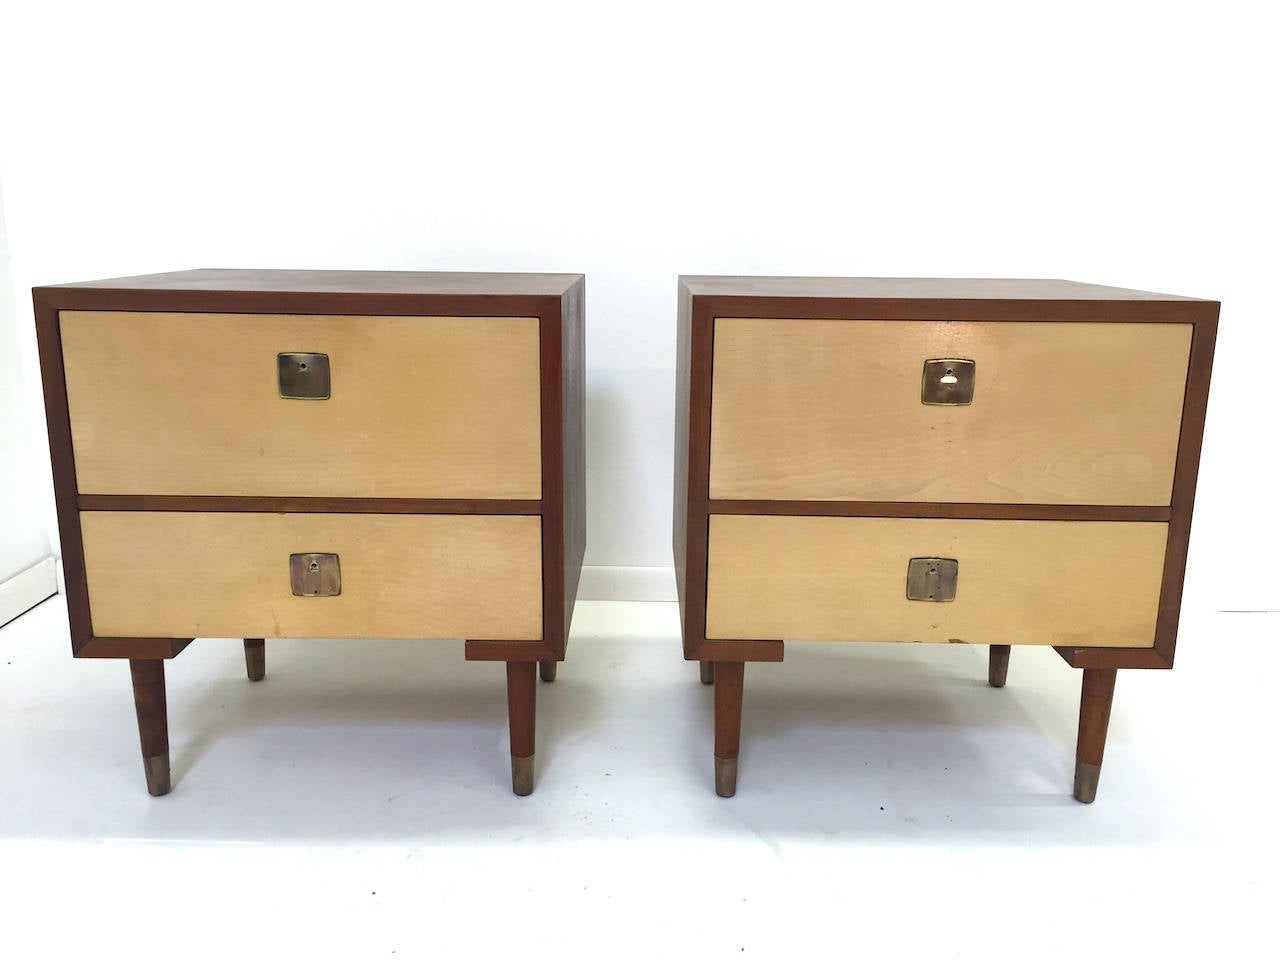 Pair of Paul Frankl nightstands for Johnson Furniture Company. These are missing the brass handles and have some minor wear from use as pictured. They are being sold in as found condition for restoration. Matching chest of drawers and Hi Boy dresser